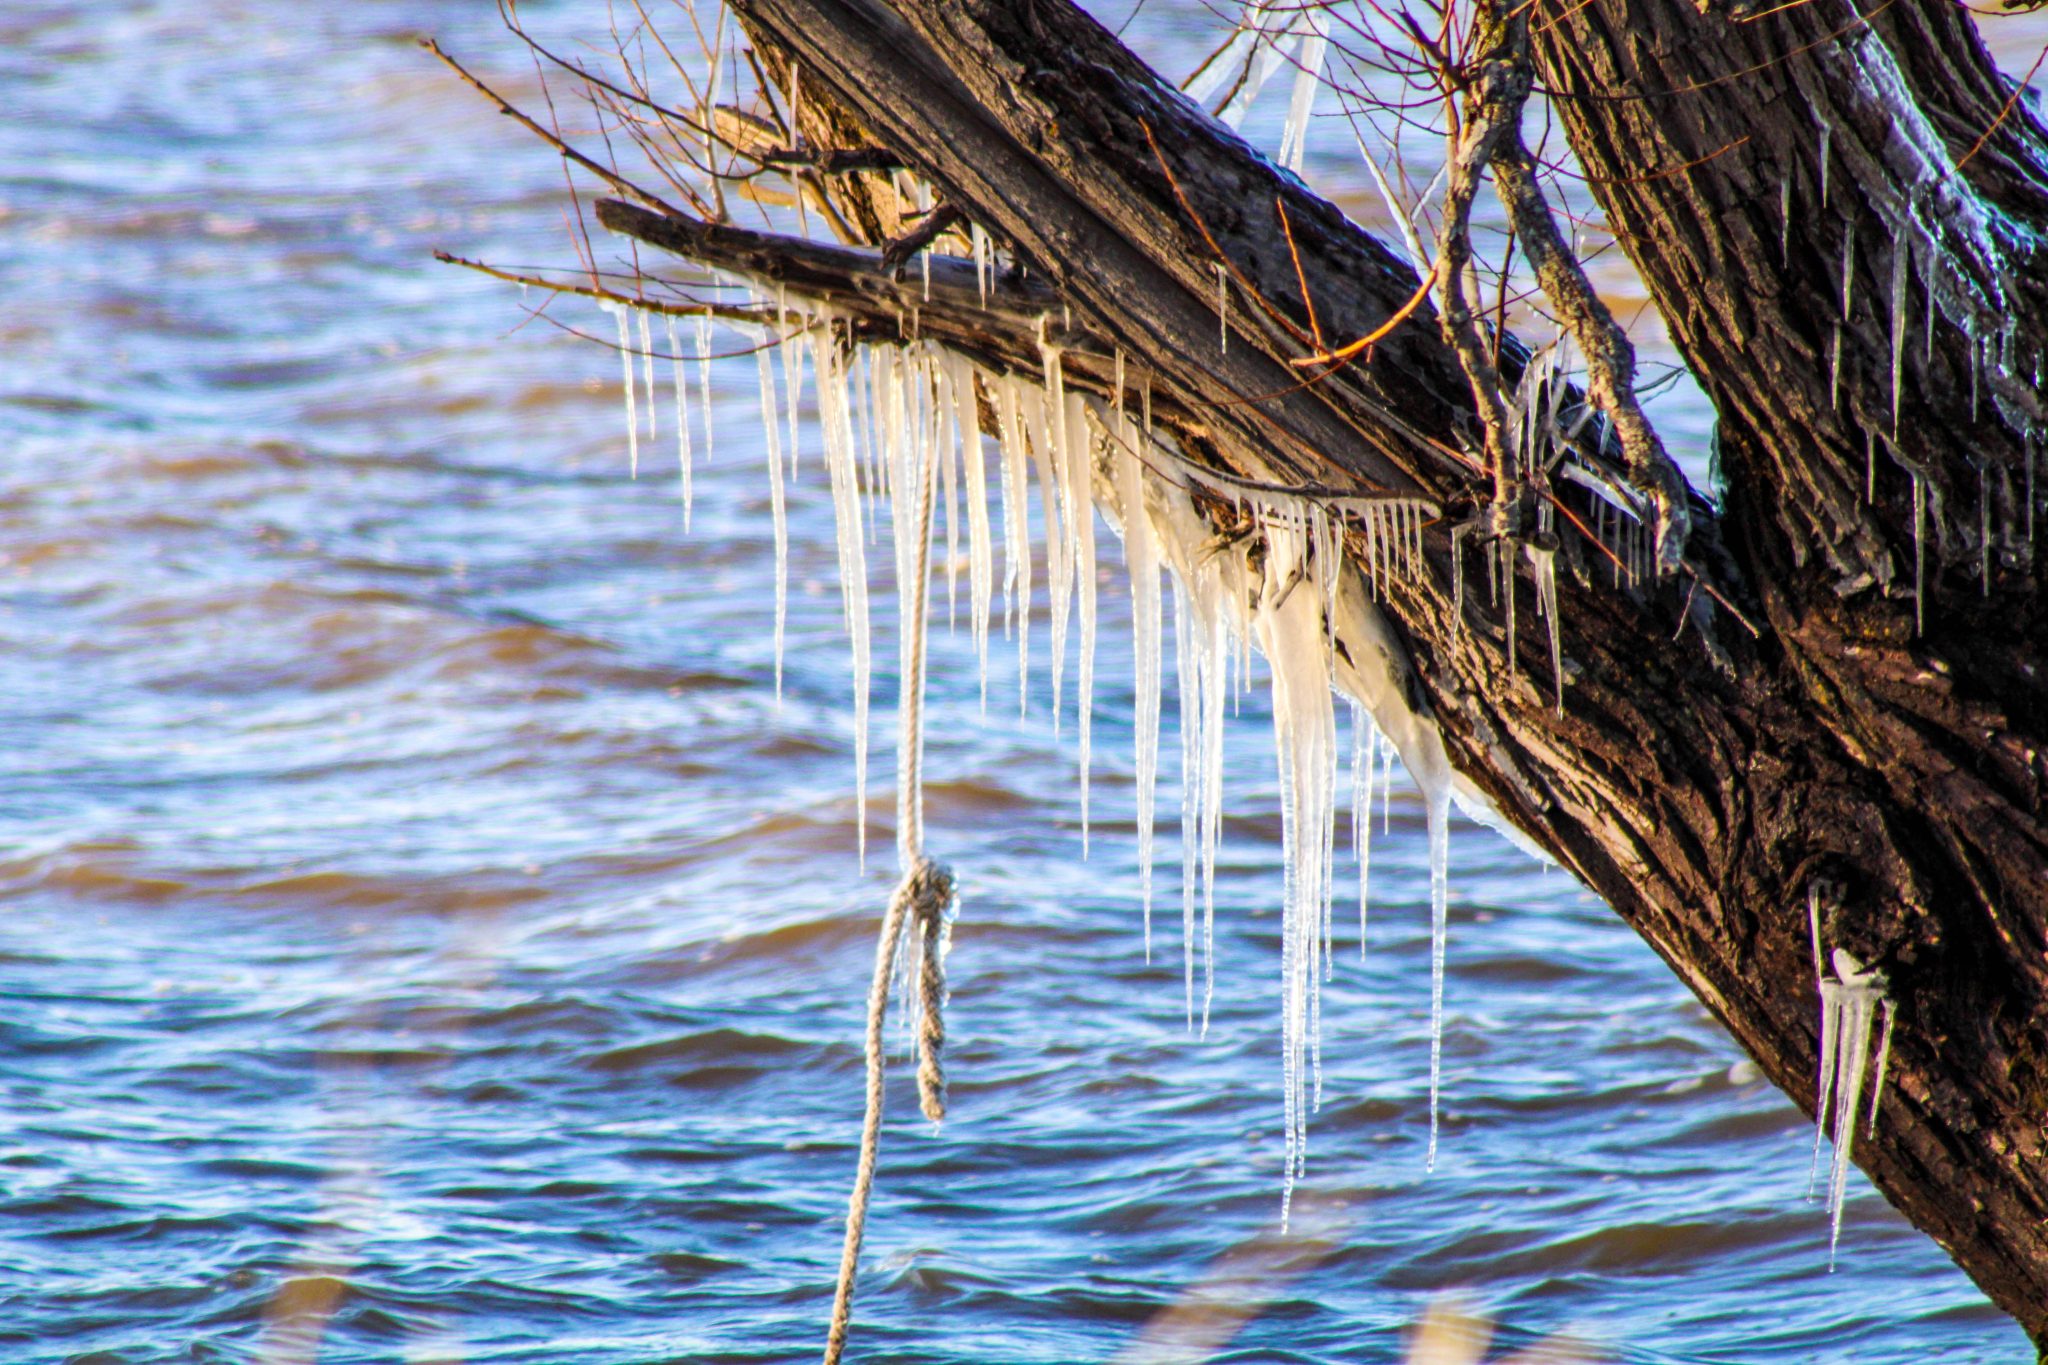 Icicles hang from a tree just offshore in Lake Ontario, Hamlin, New York, USA